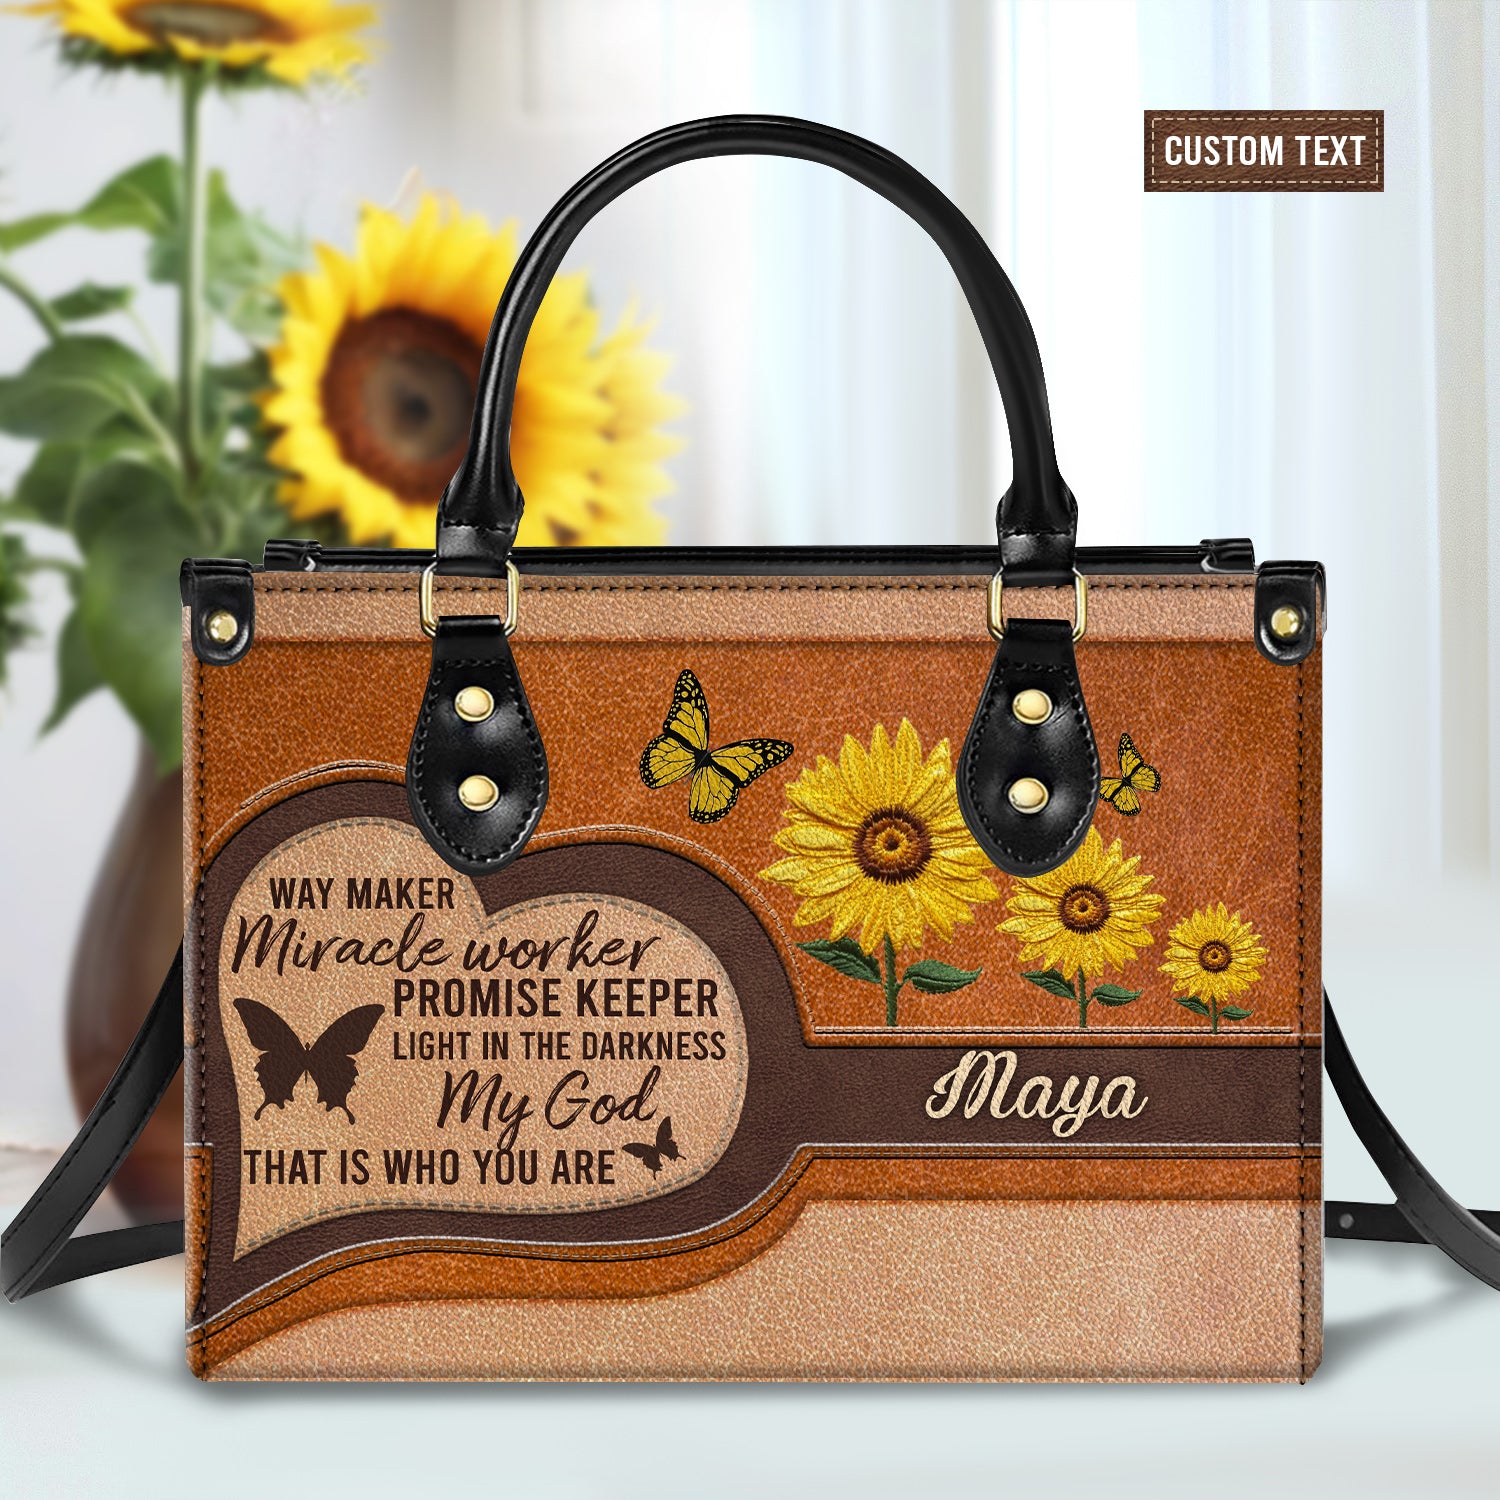 Way Maker Miracle Worker Personalized Leather Handbag